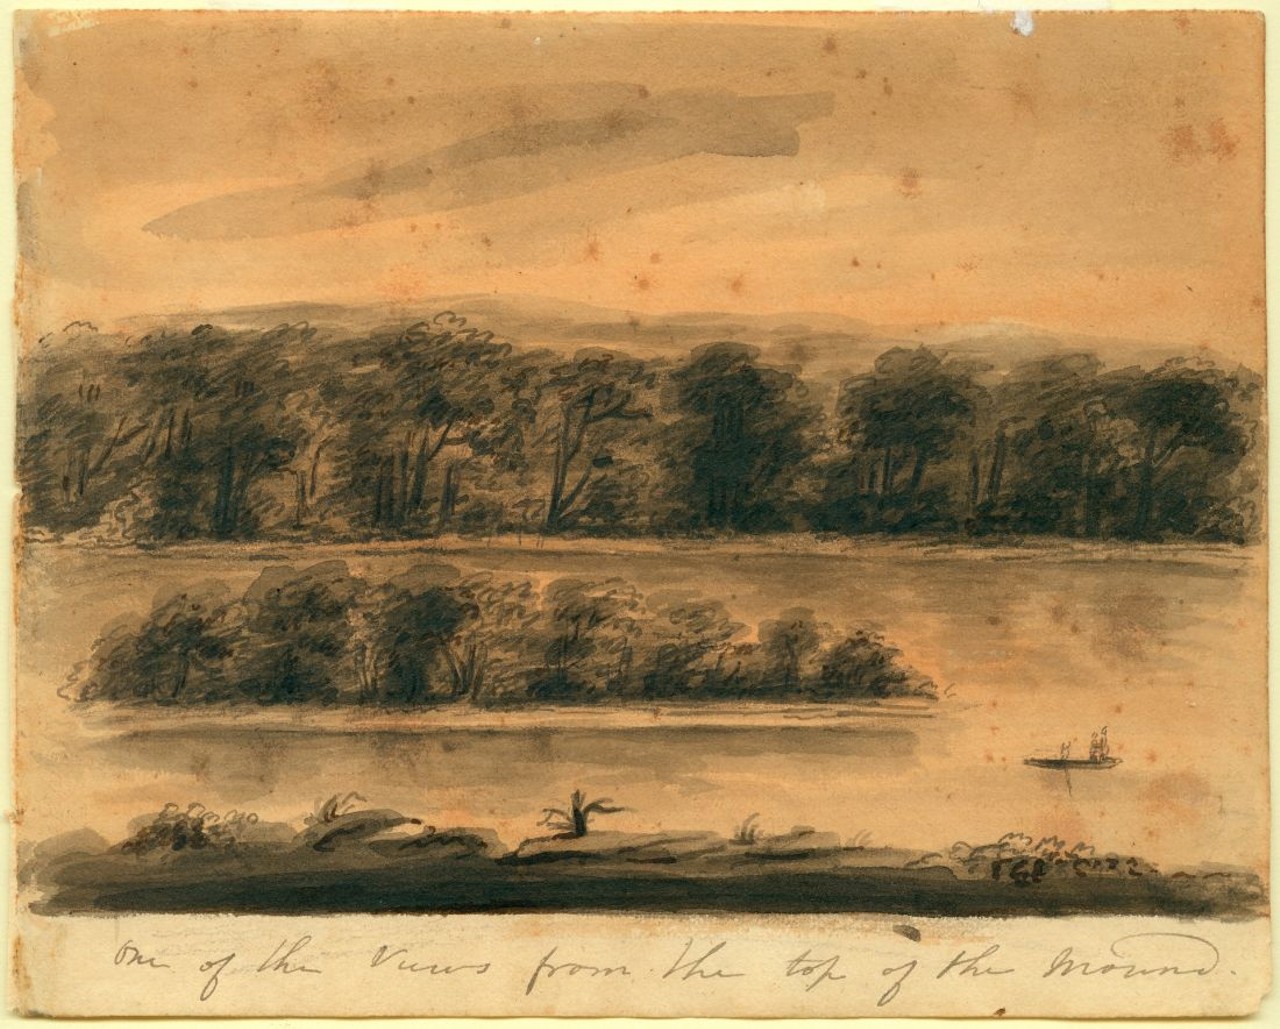 SKETCH OF BLOODY ISLAND, 1818
"Bloody Island formed sometime in the late 1790s. Anna Marie von Phul drew this sketch of it in 1818. Just one year earlier Charles Lucas had been killed there in a duel with future Missouri senator Thomas Hart Benton." &#151; Andrew Wanko, 'Great River City'. 
One of the views from the top of the Mound. Watercolor on paper by Anna Maria von Phul, 1818. Missouri Historical Society Collections.